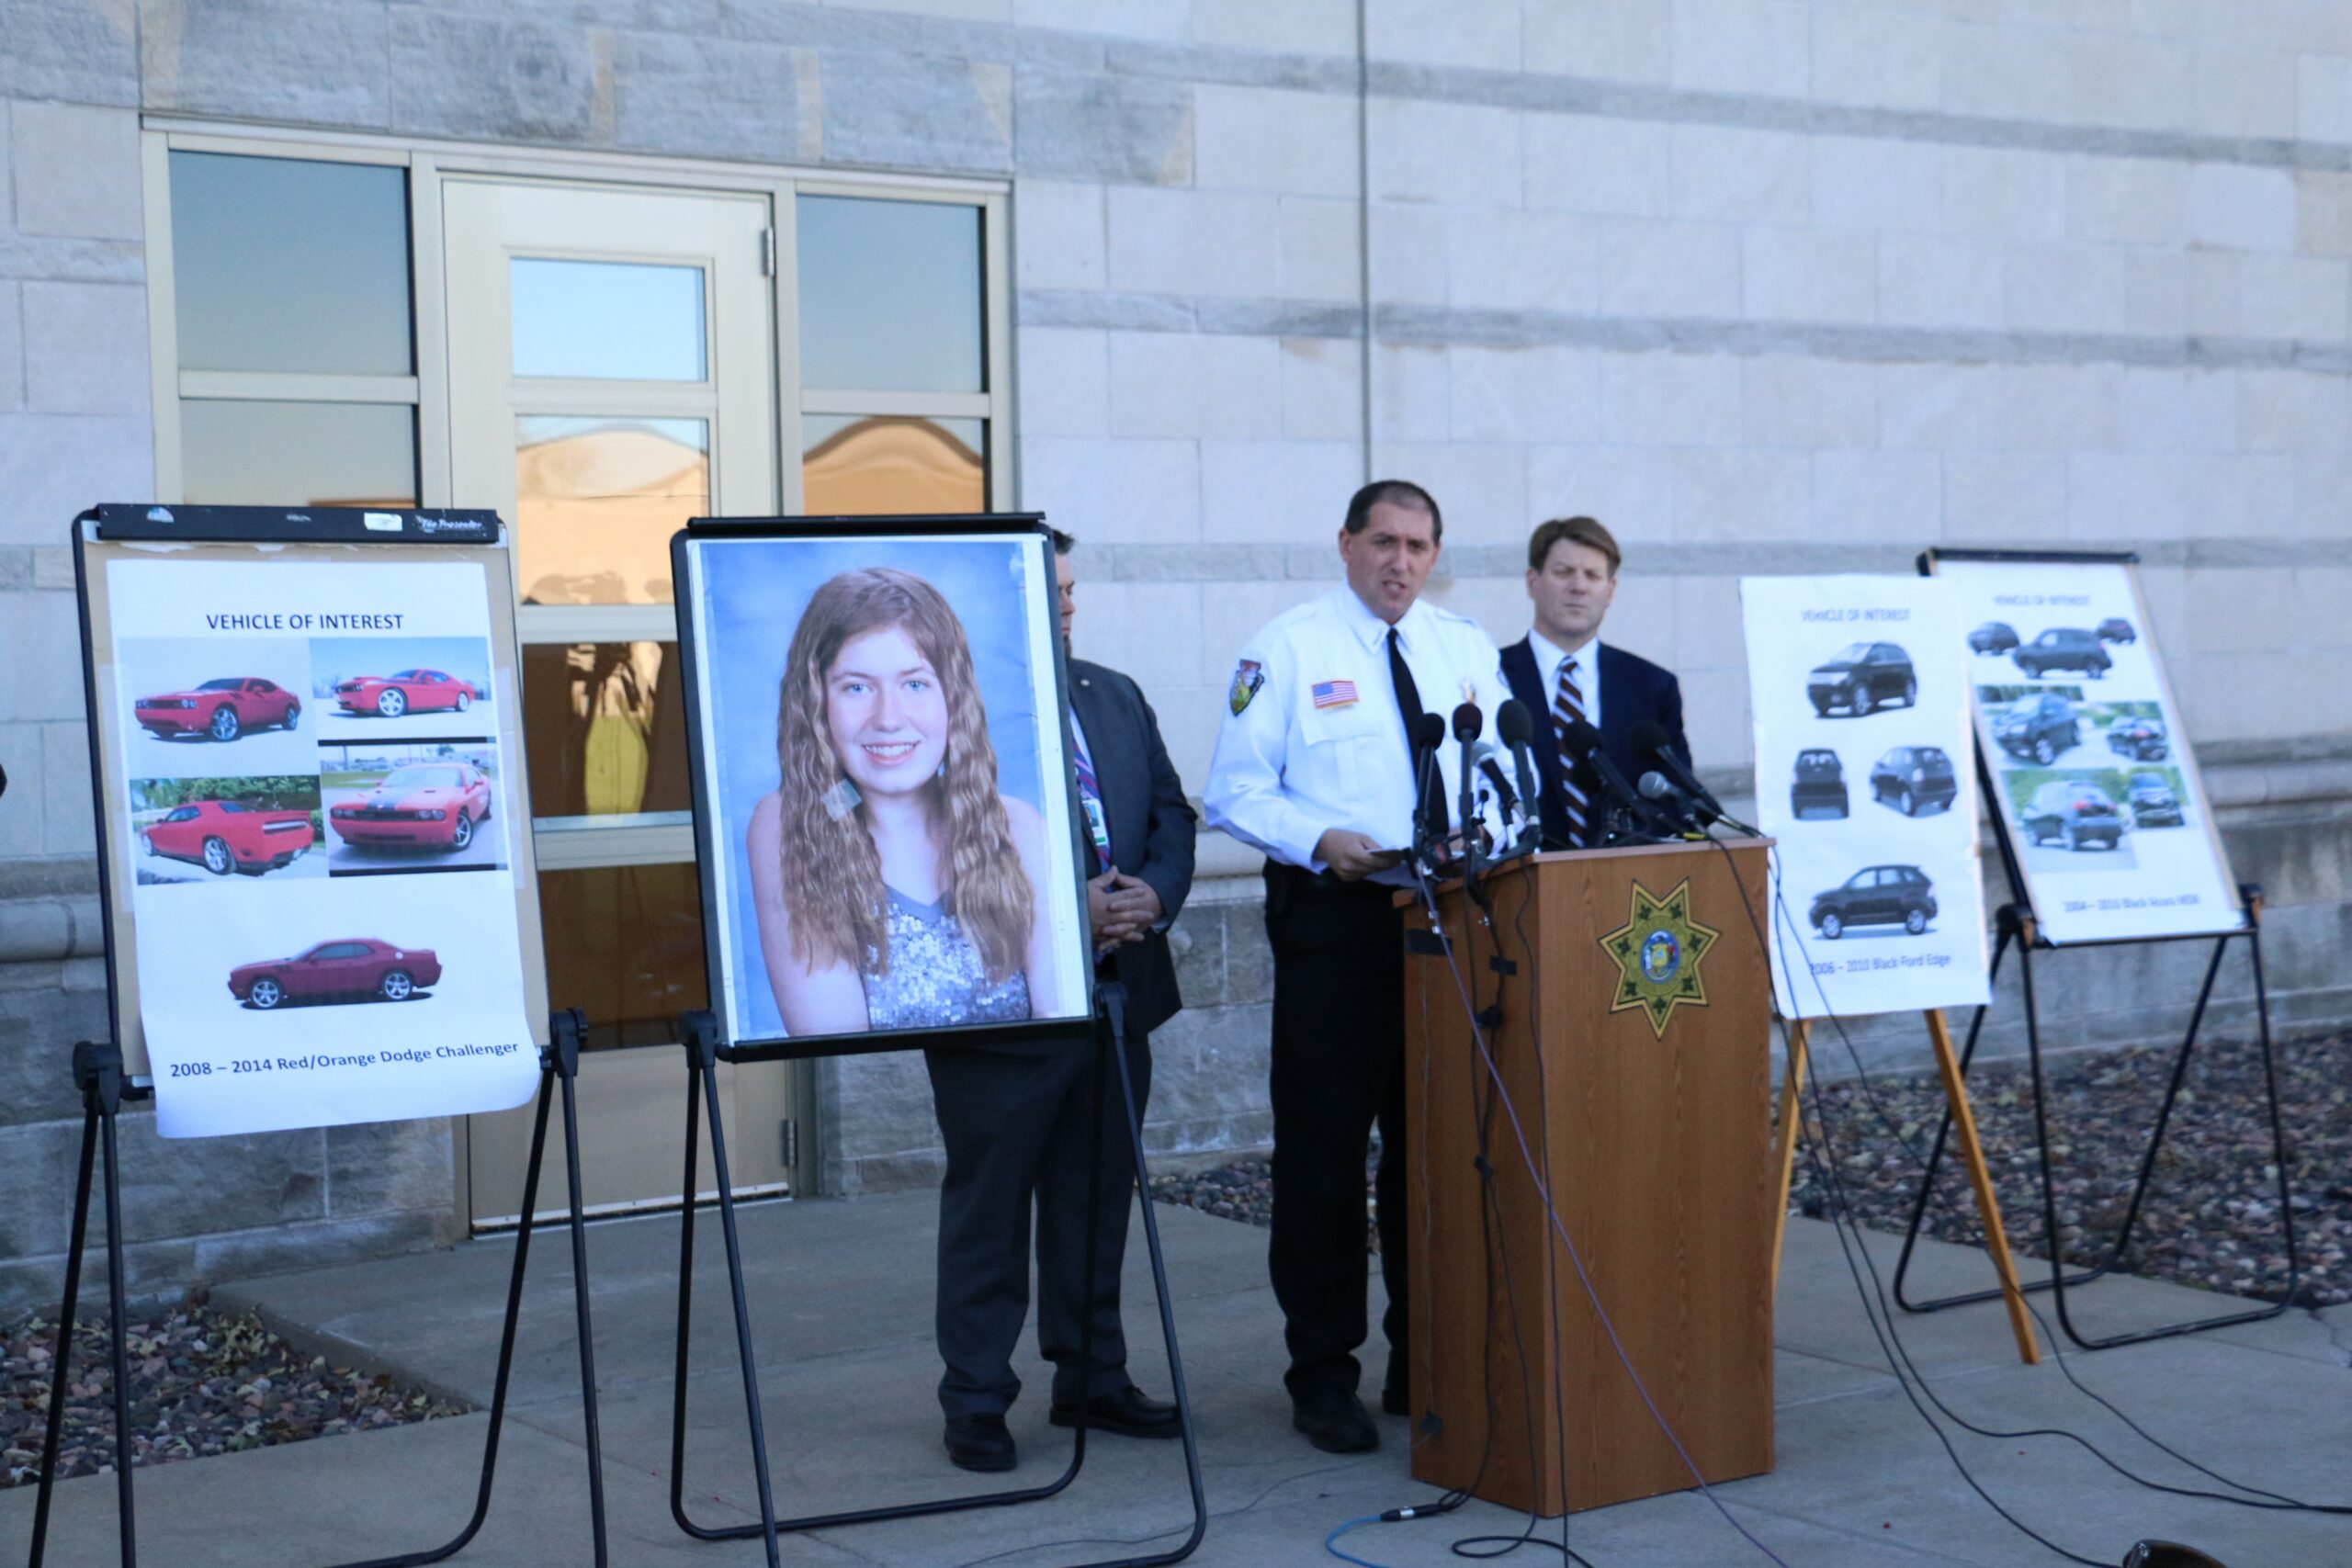 Jayme Closs press conference, October 22, 2018